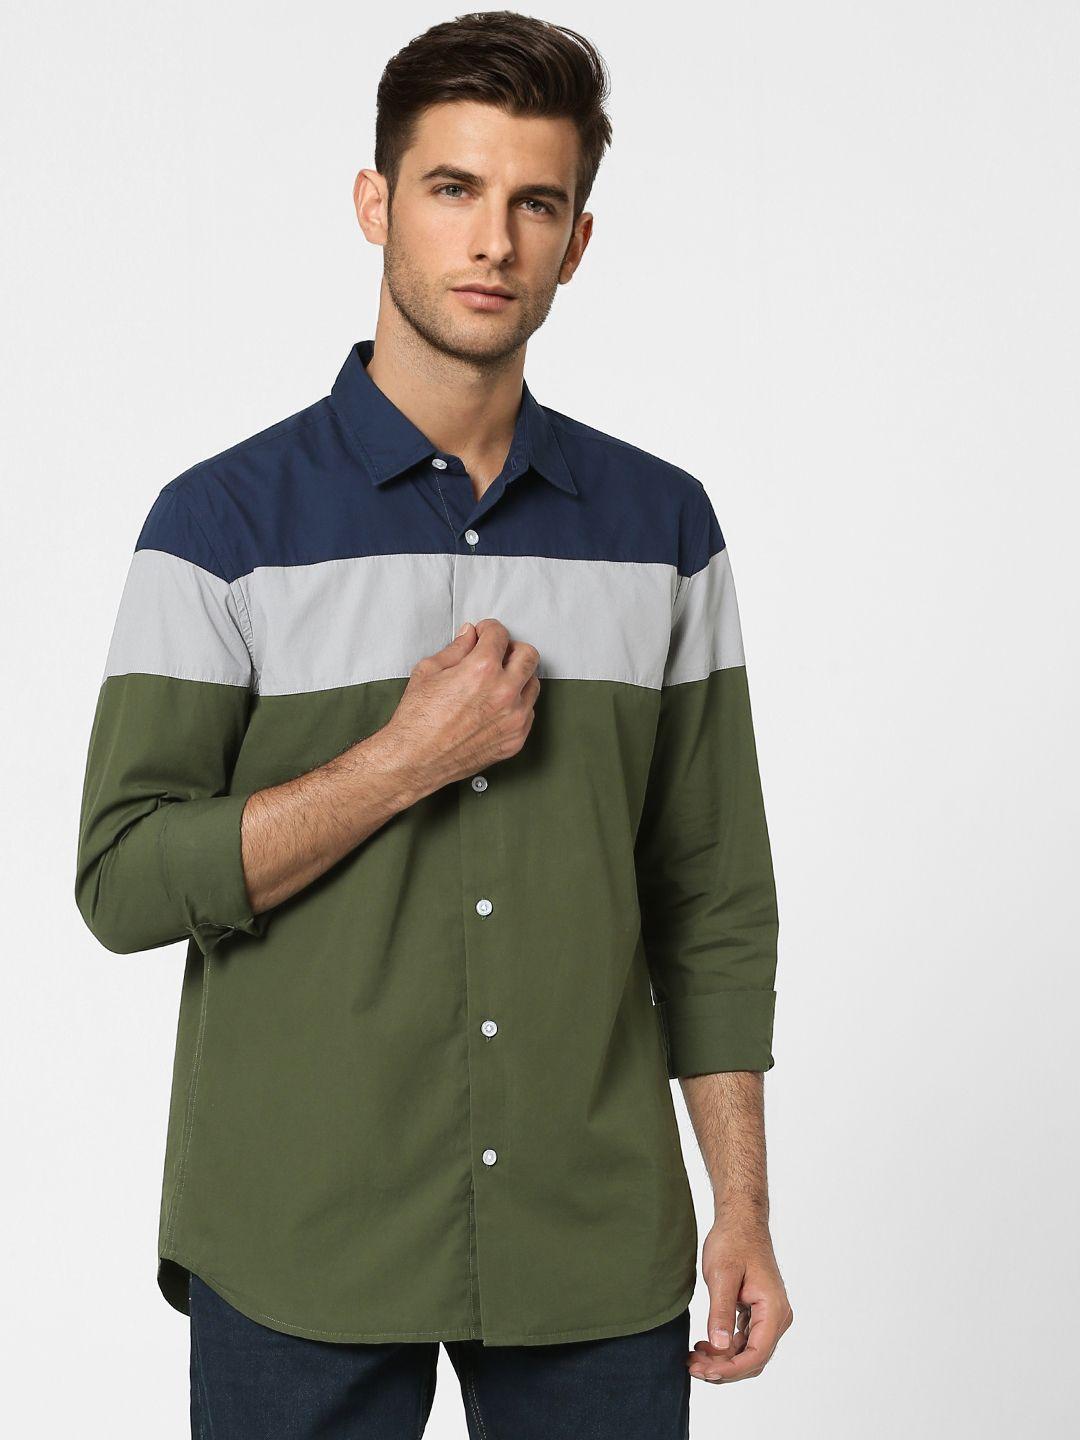 jack & jones men olive green and navy blue slim fit colourblocked pure cotton casual shirt